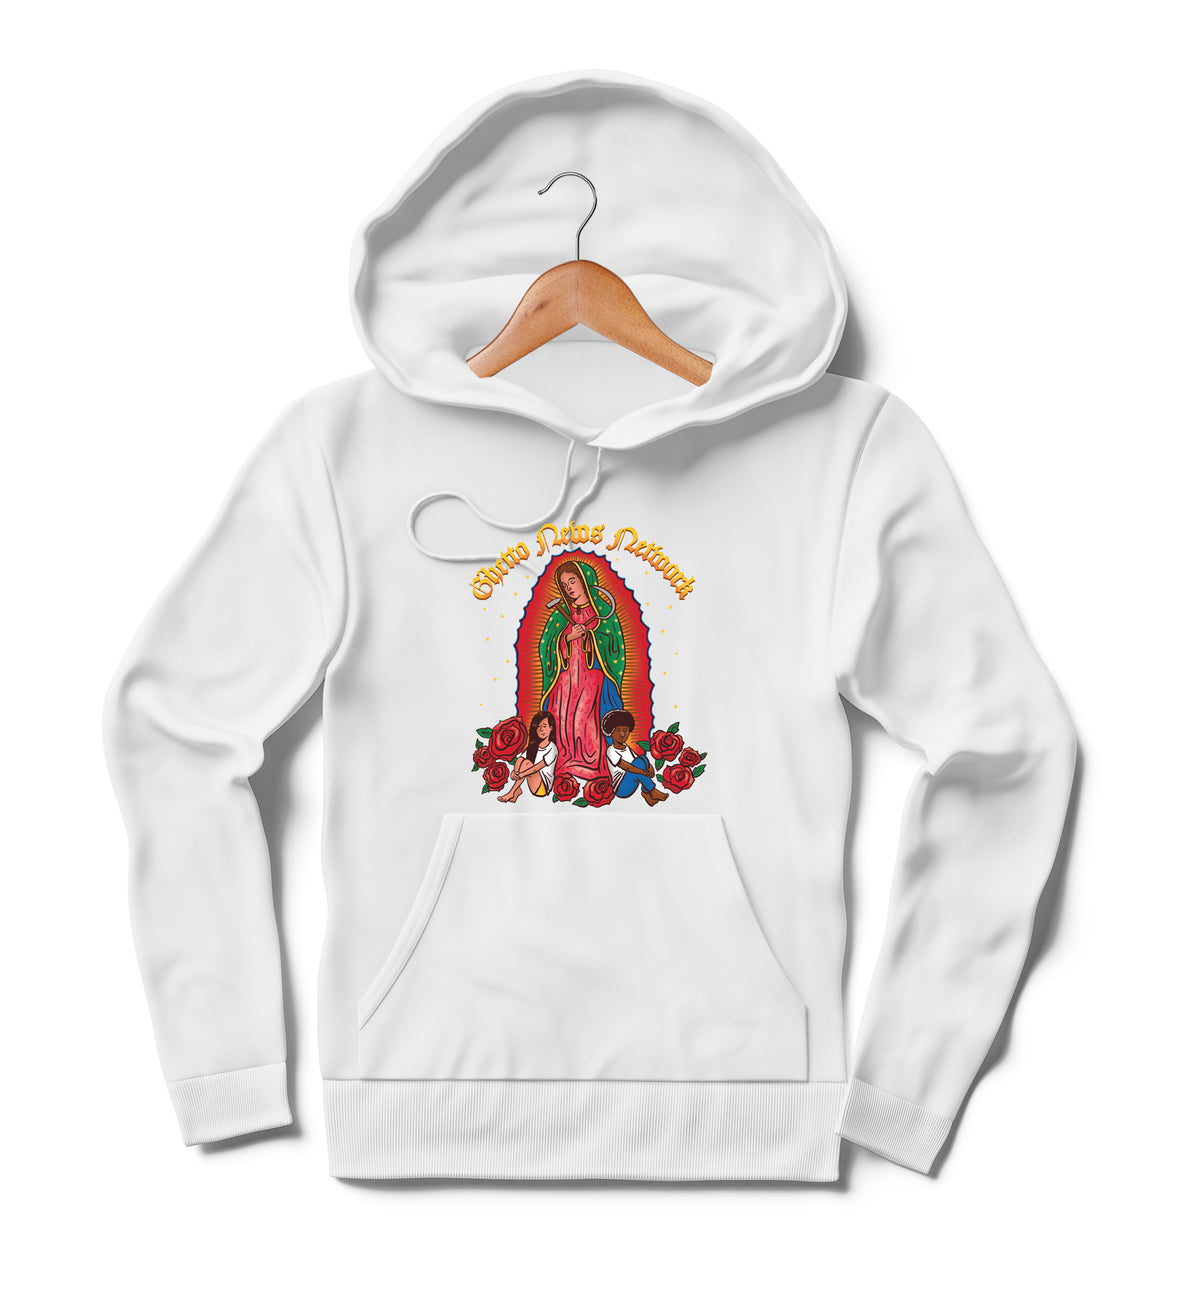 Shop and Buy Ghetto News Network Hoodie